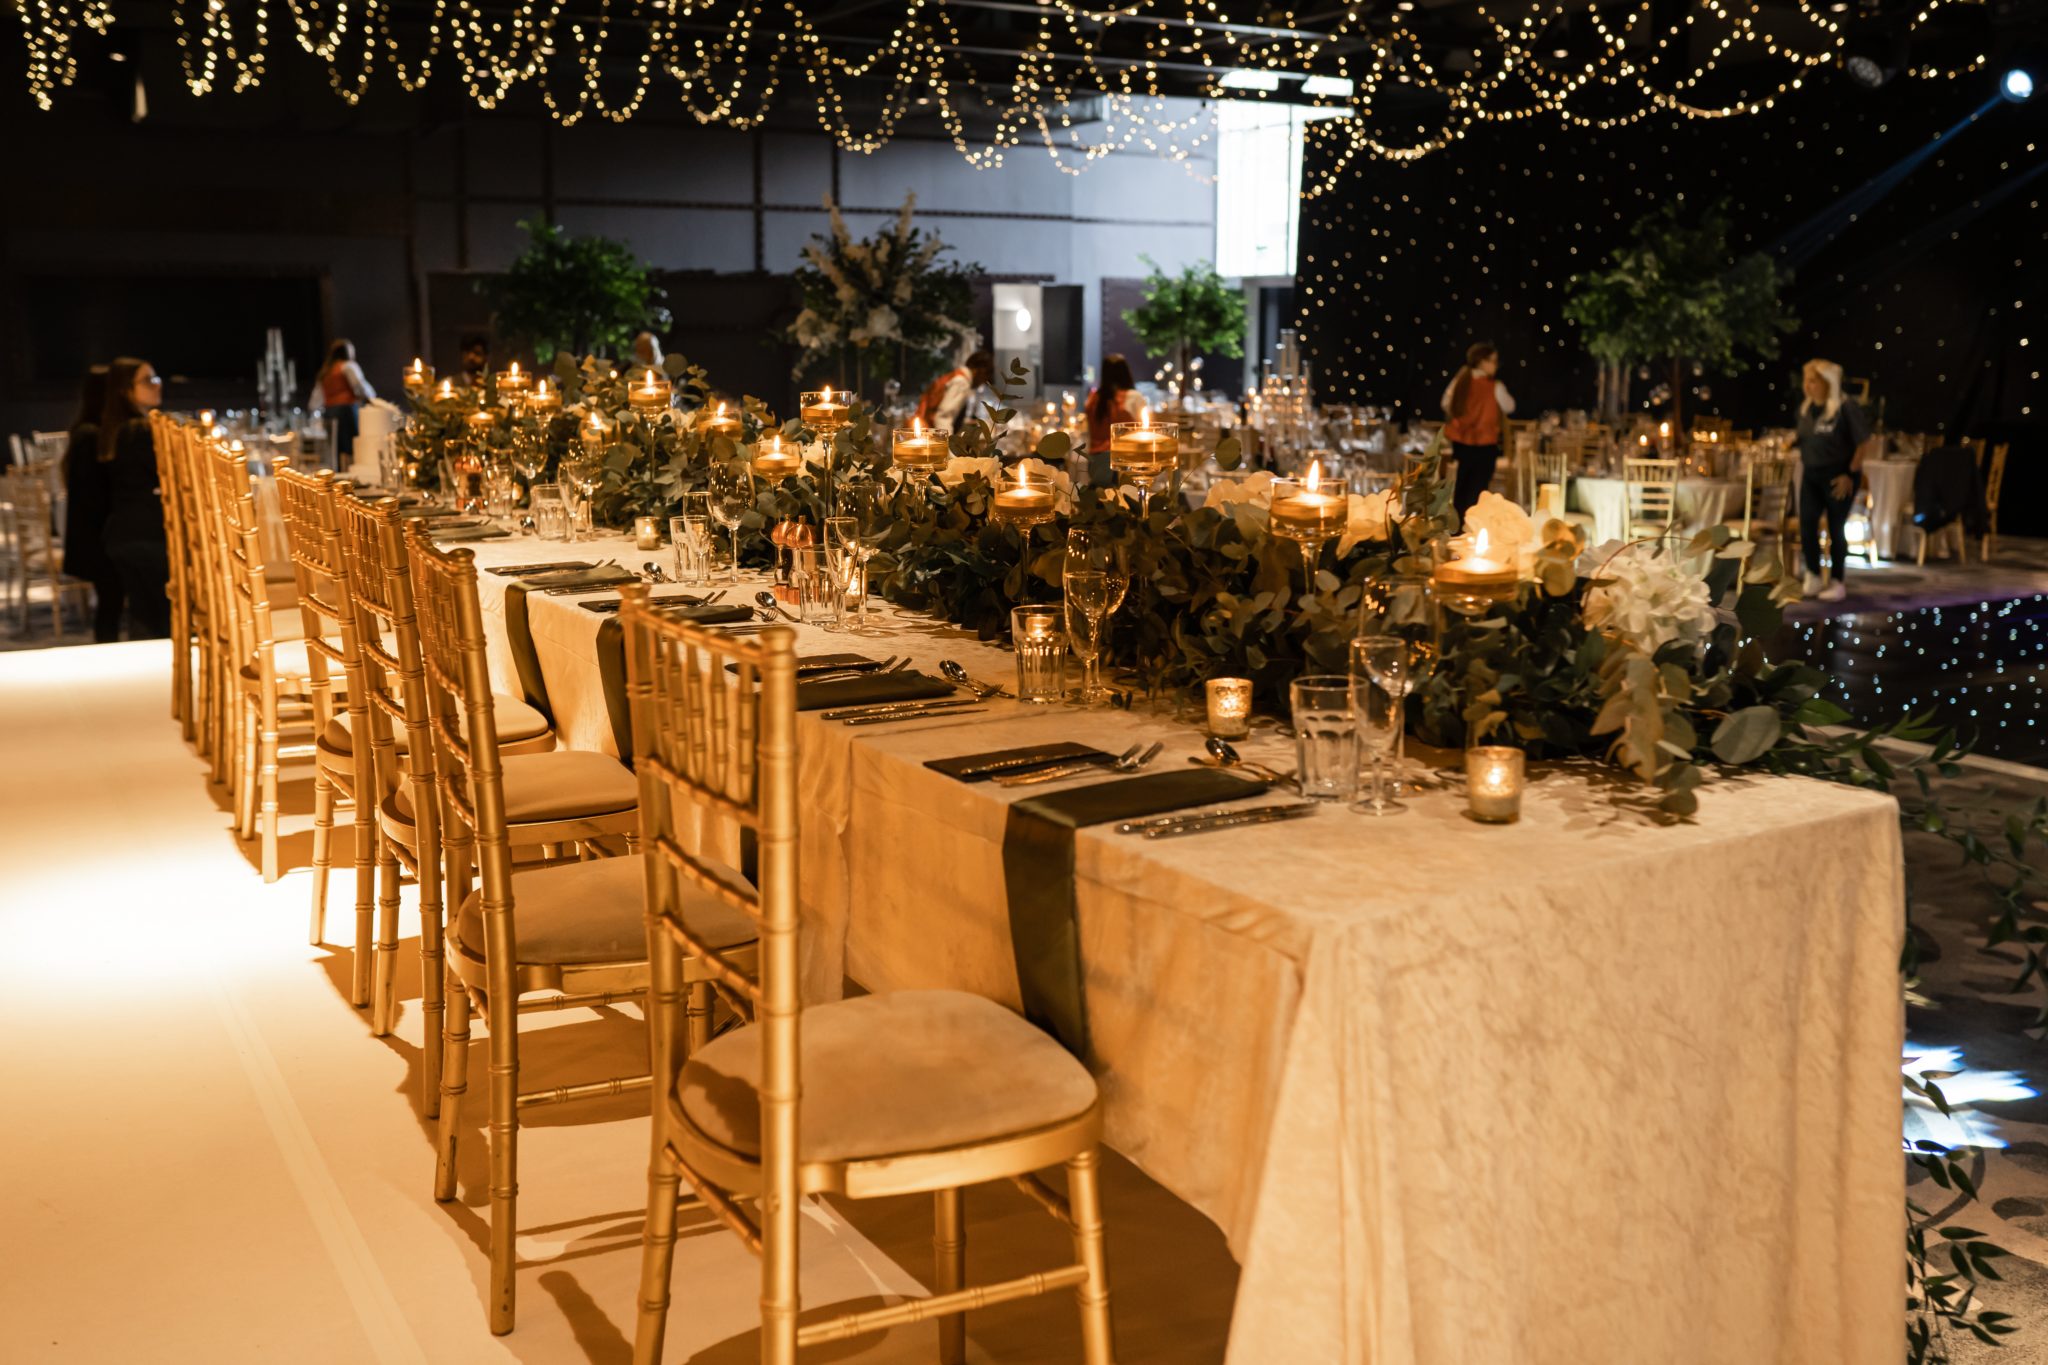 Top table wedding and events decor inspiration